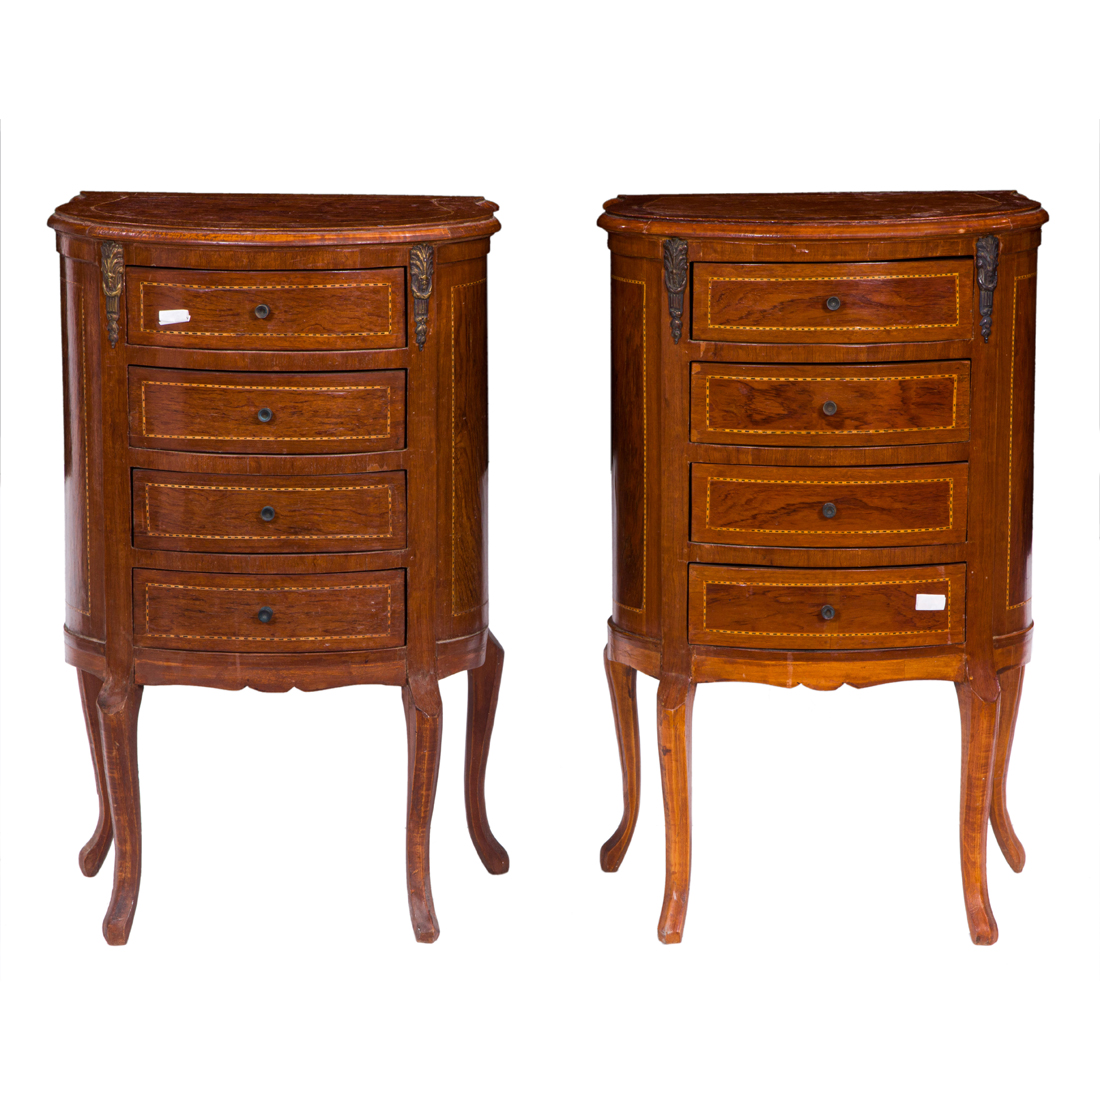 PAIR OF NEOCLASSICAL STYLE NIGHTSTANDS